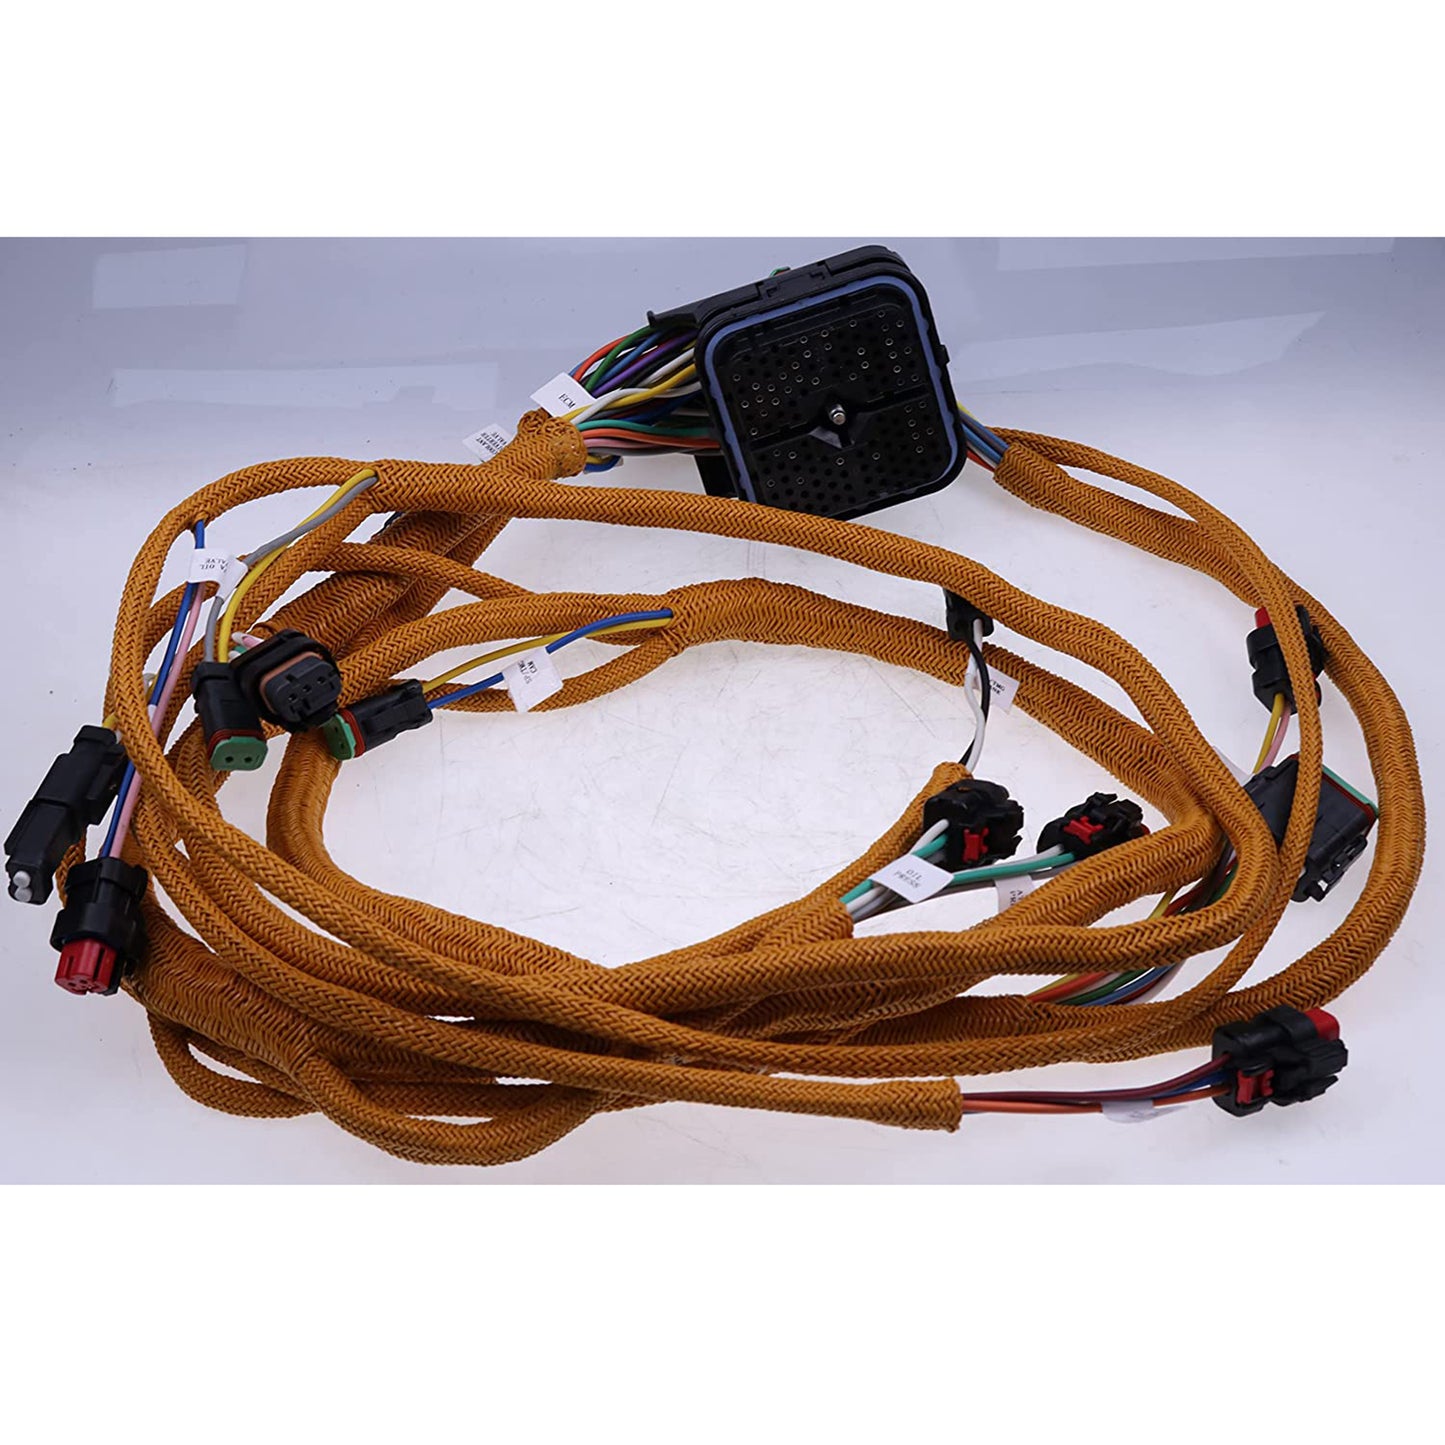 263-9001 2639001 Wiring Harness Compatible With Caterpillar Truck with C15 Engine